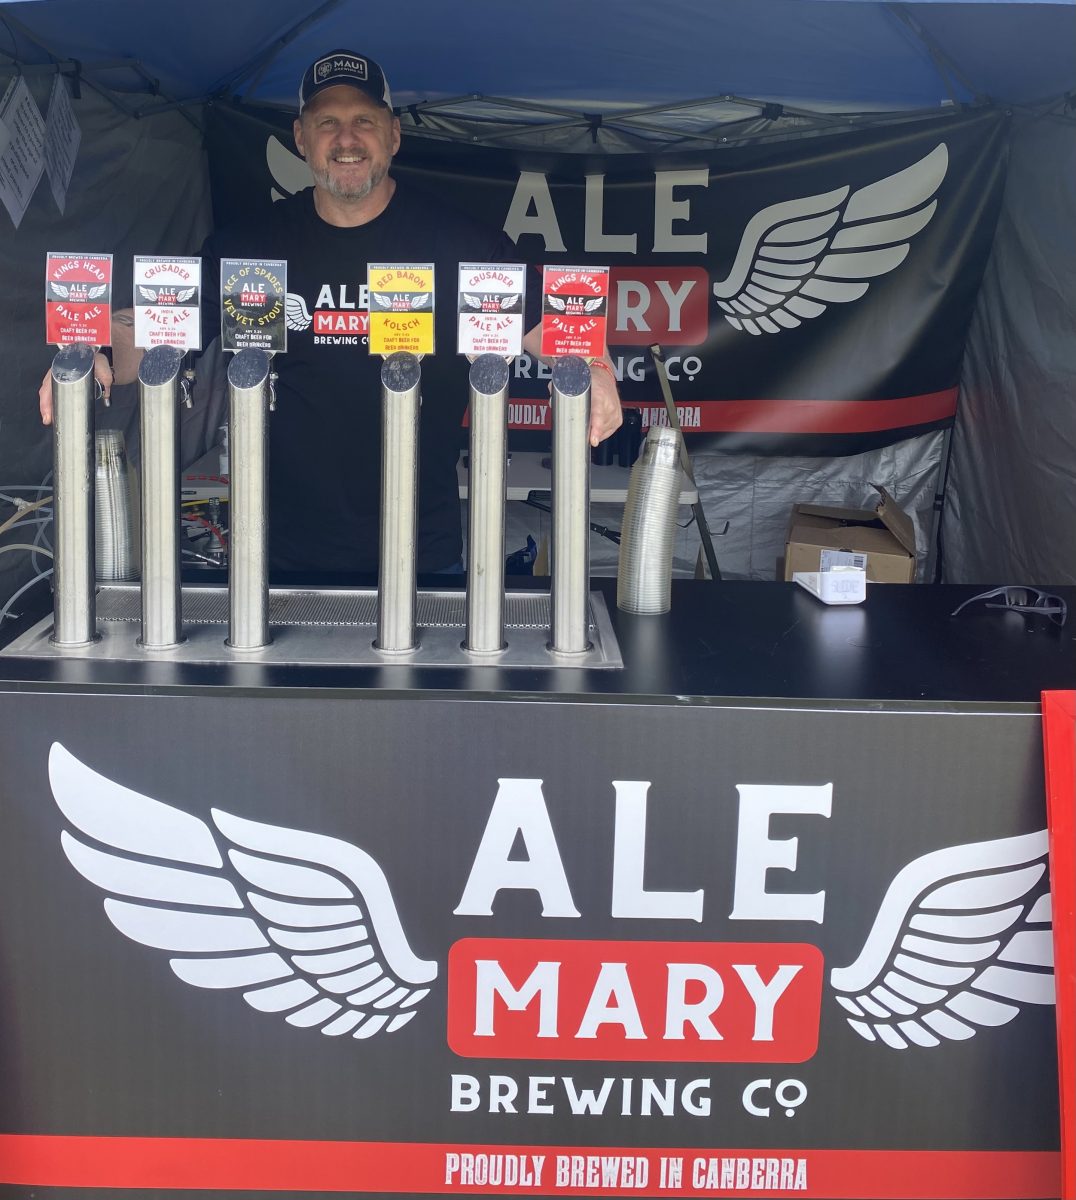 man standing behind Ale Mary logo with beer taps